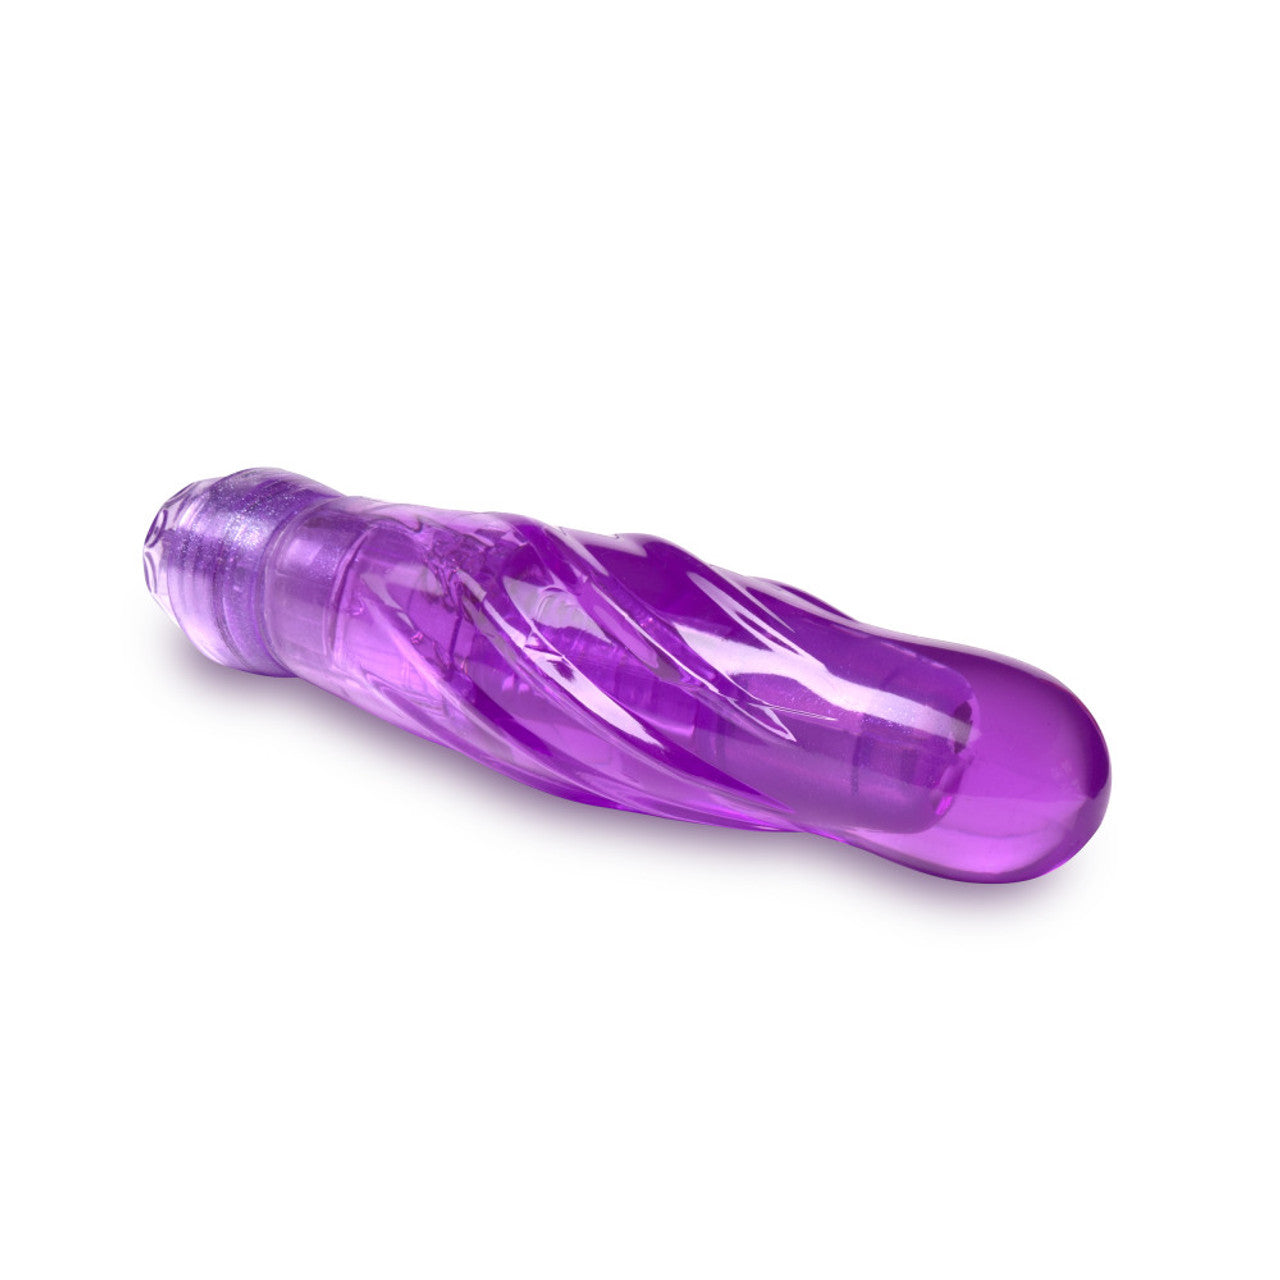 Naturally Yours Bachata 6.5" Vibrating Dildo - Purple - Thorn & Feather Sex Toy Canada